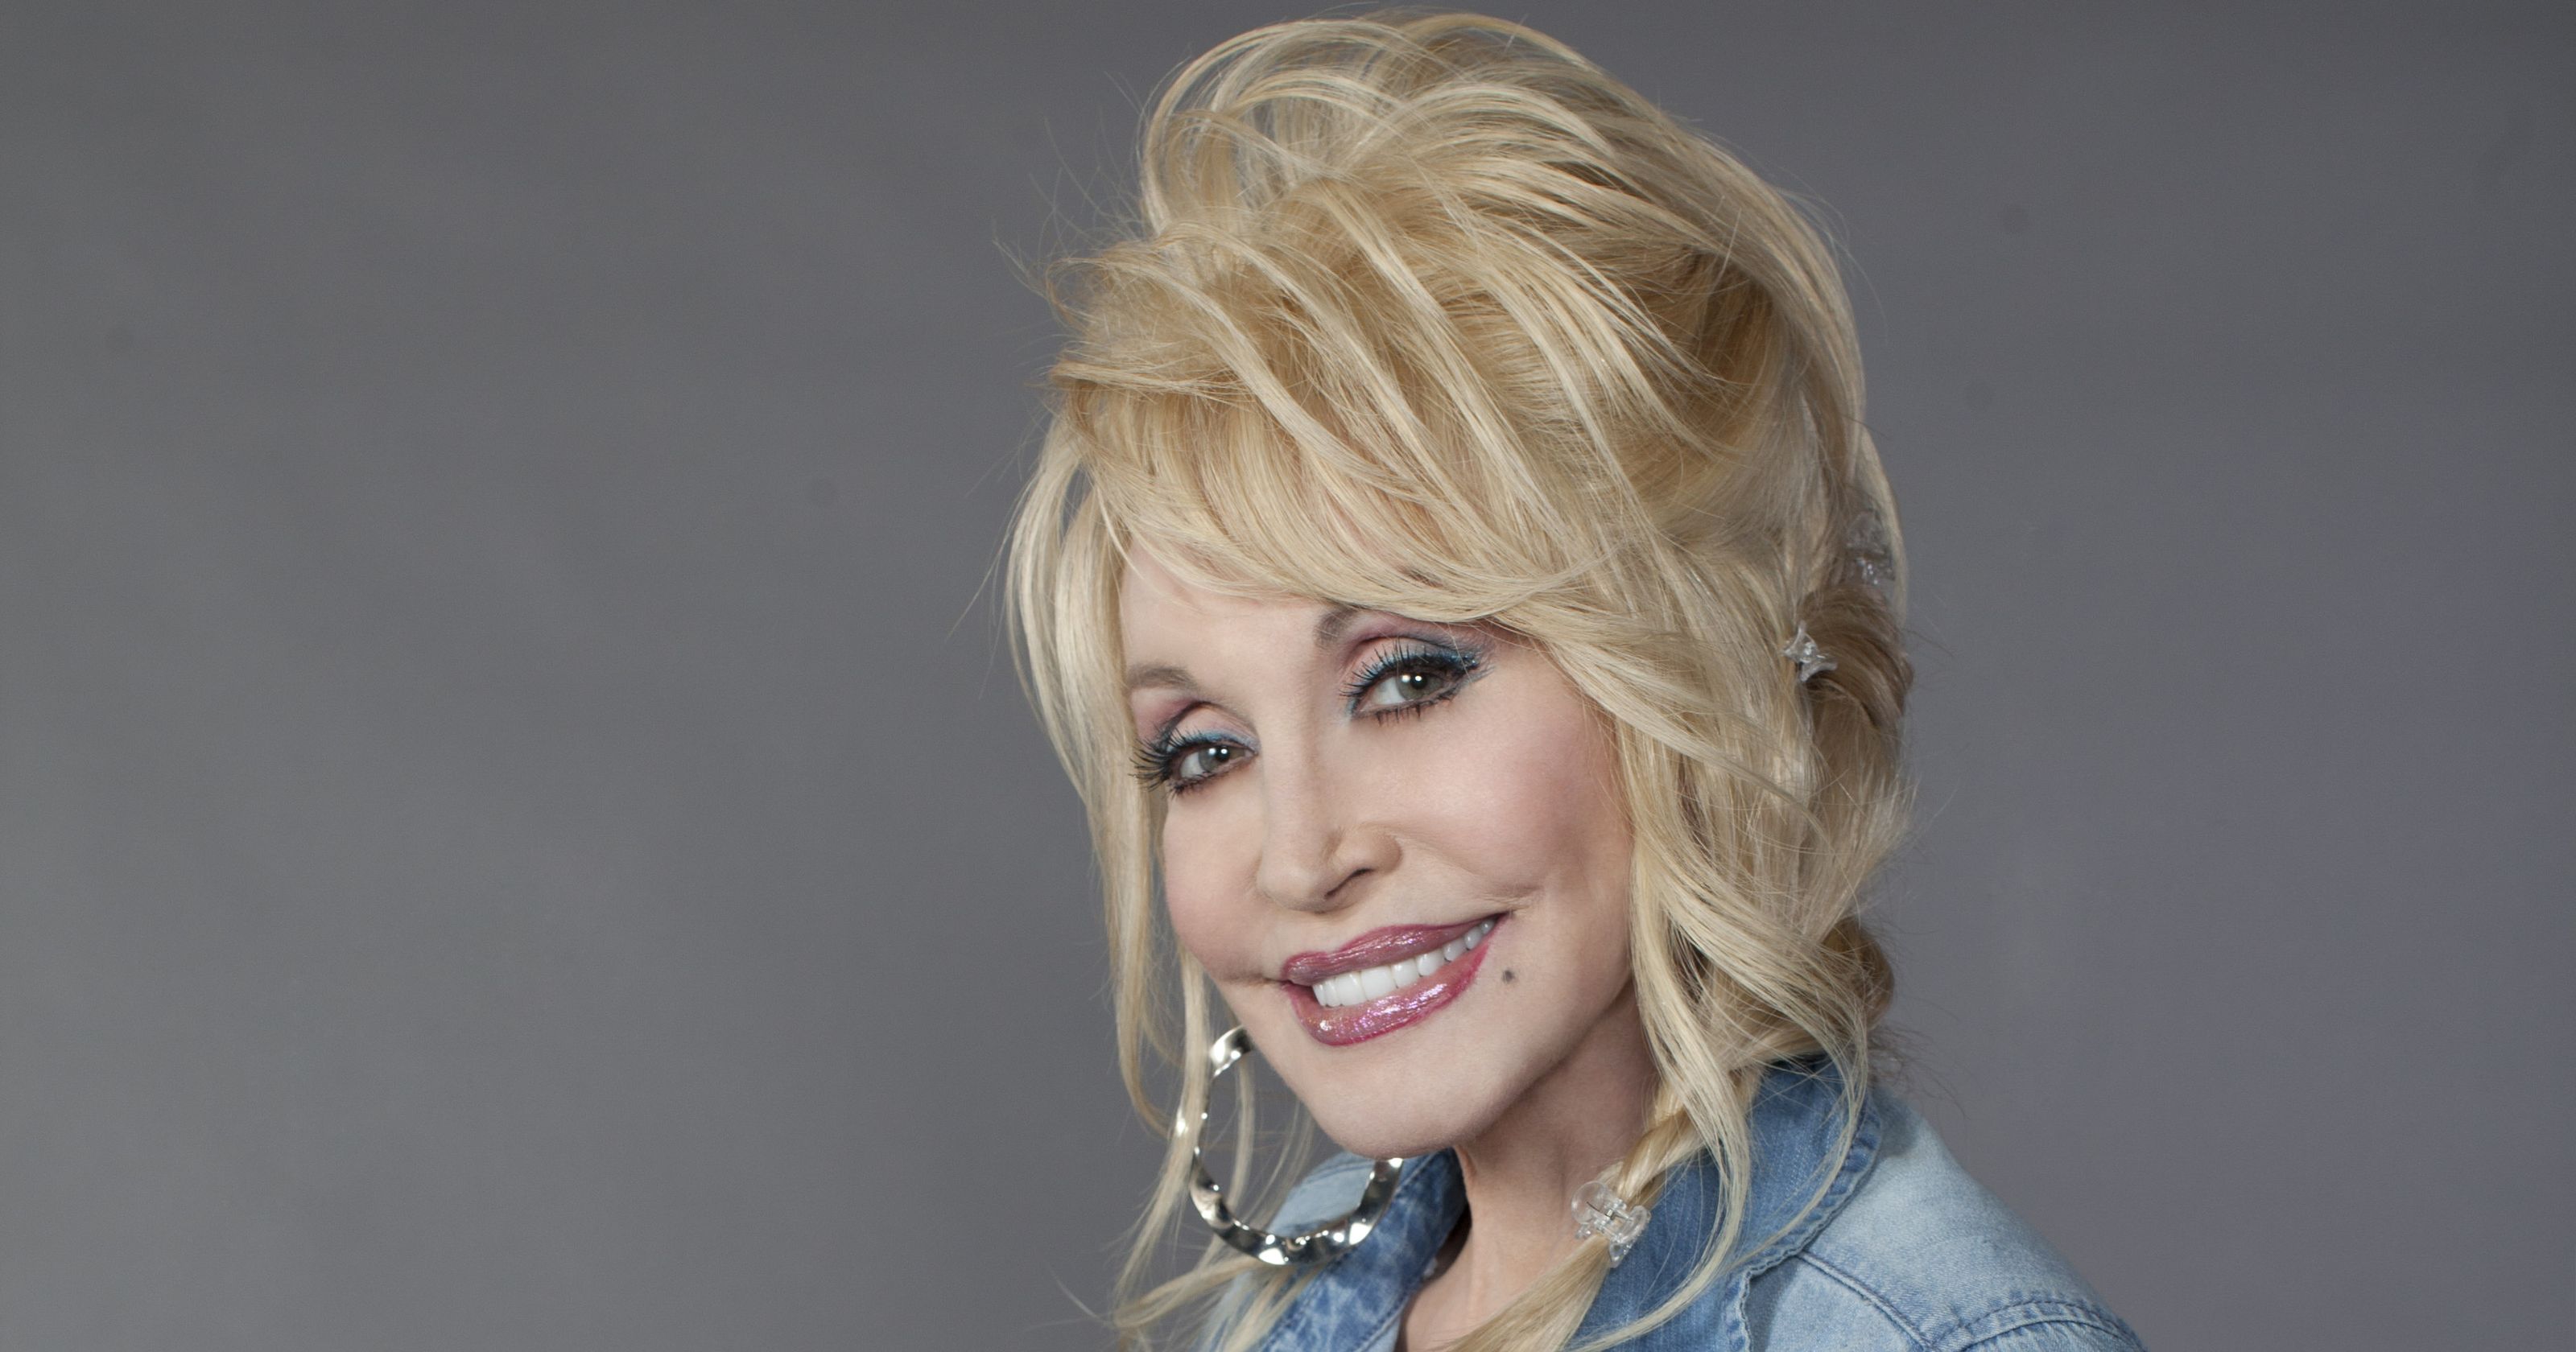 The 2016 ACM Awards will be a big night for Dolly Parton.